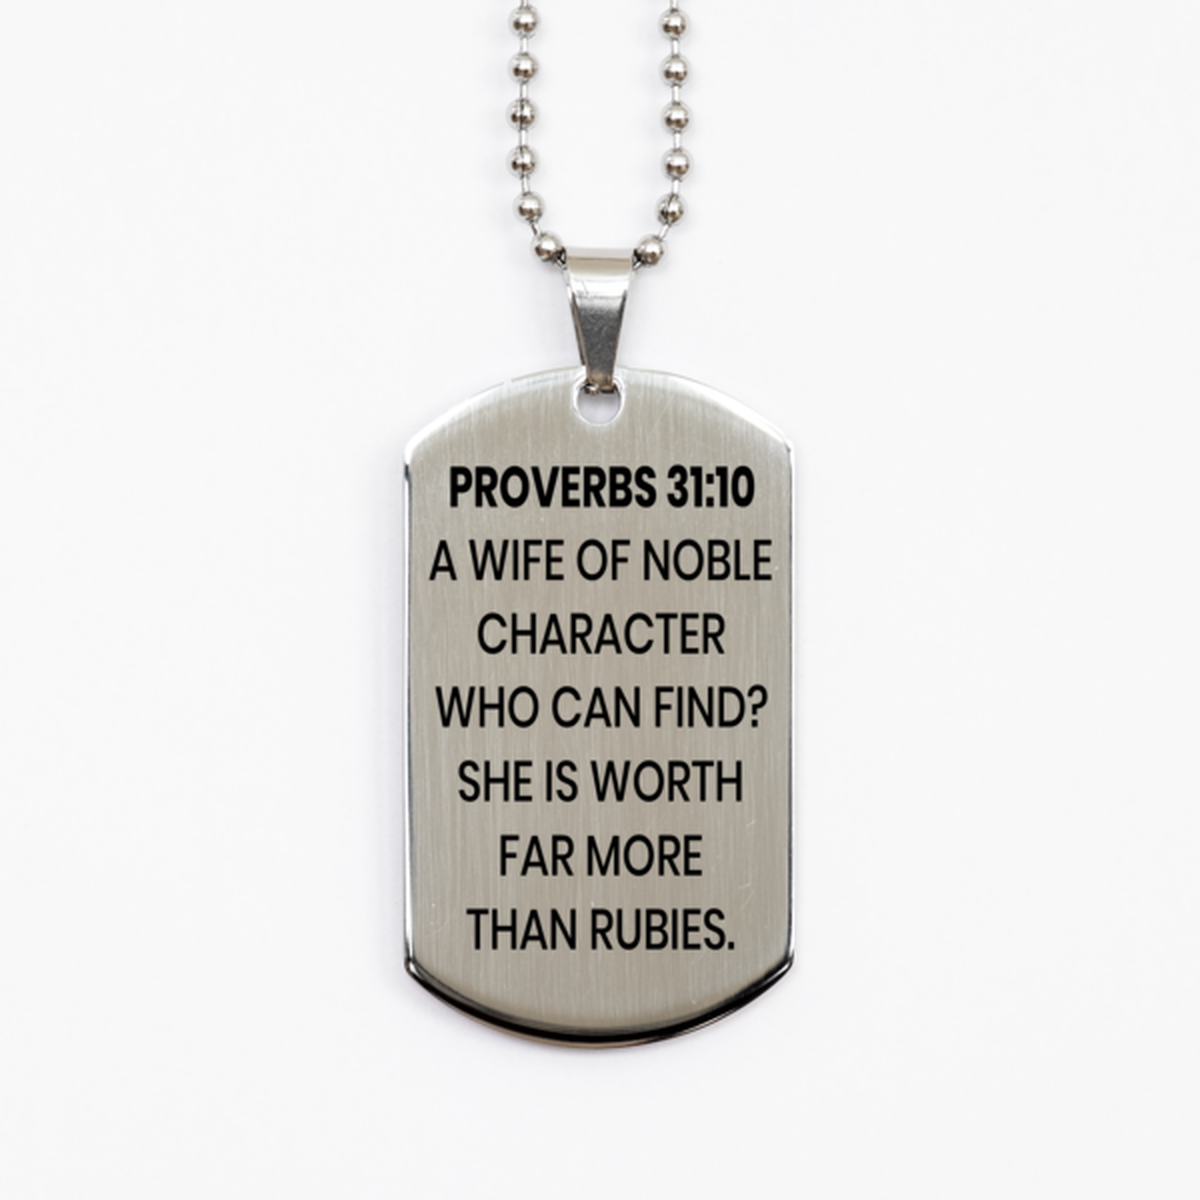 Proverbs 31:10 Necklace, Bible Verse Necklace, Christian Necklace, Christian Birthday Gift, Stainless Steel Dog Tag Necklace, Gift for Christian.